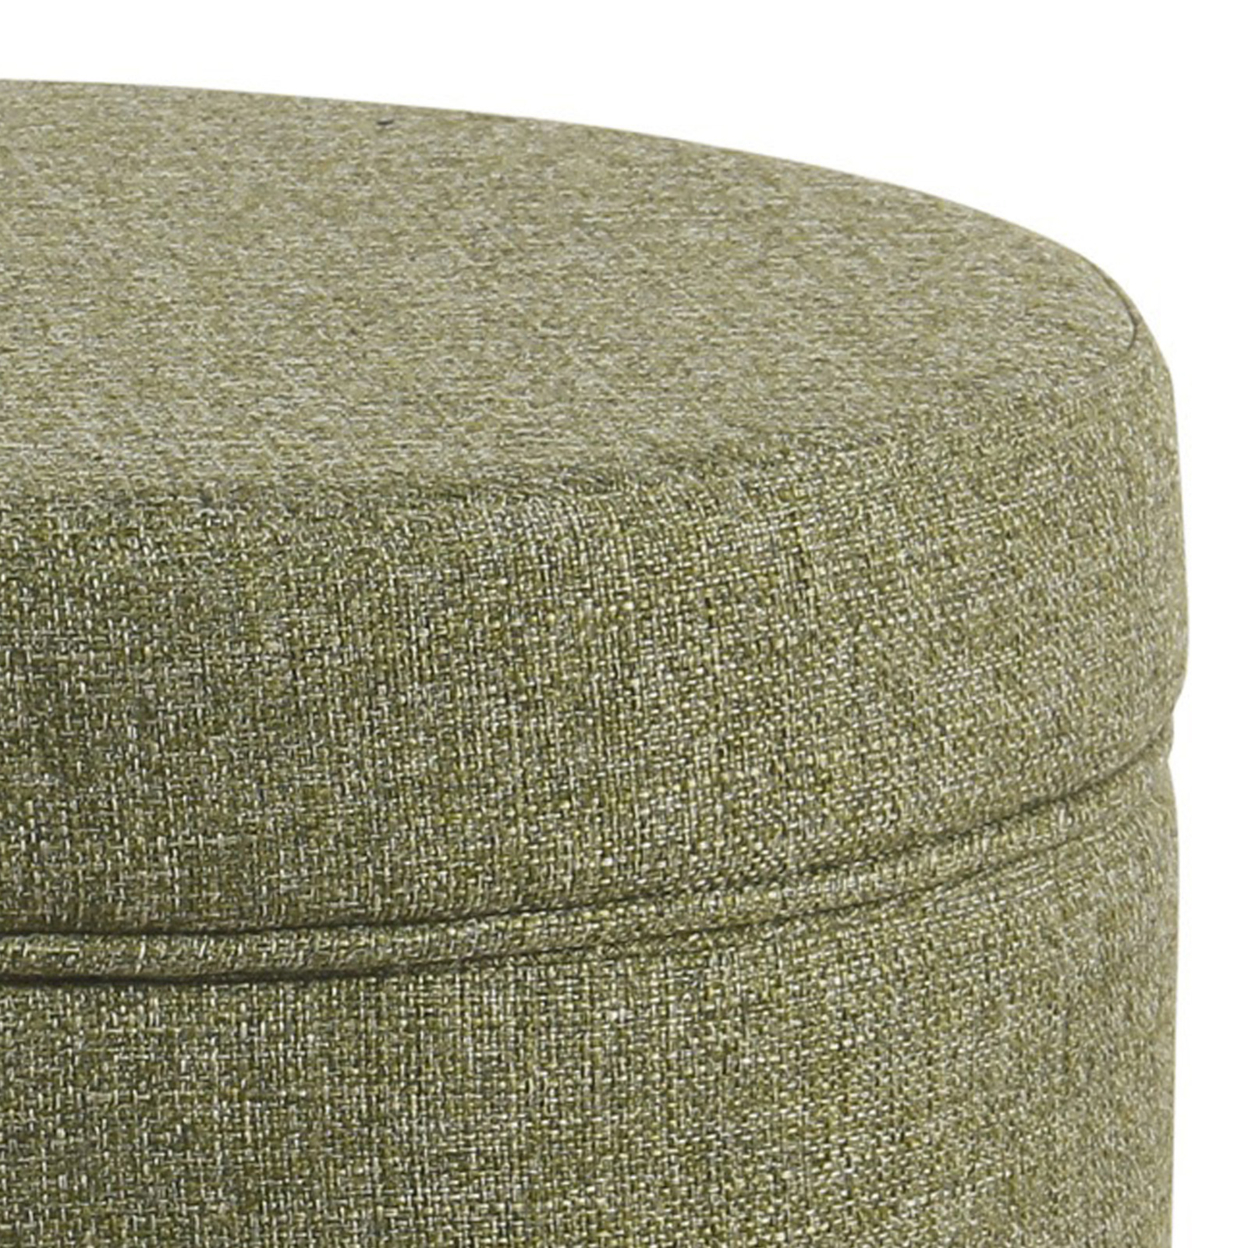 Fabric Upholstered Round Wooden Ottoman With Lift Off Lid Storage, Green- Saltoro Sherpi